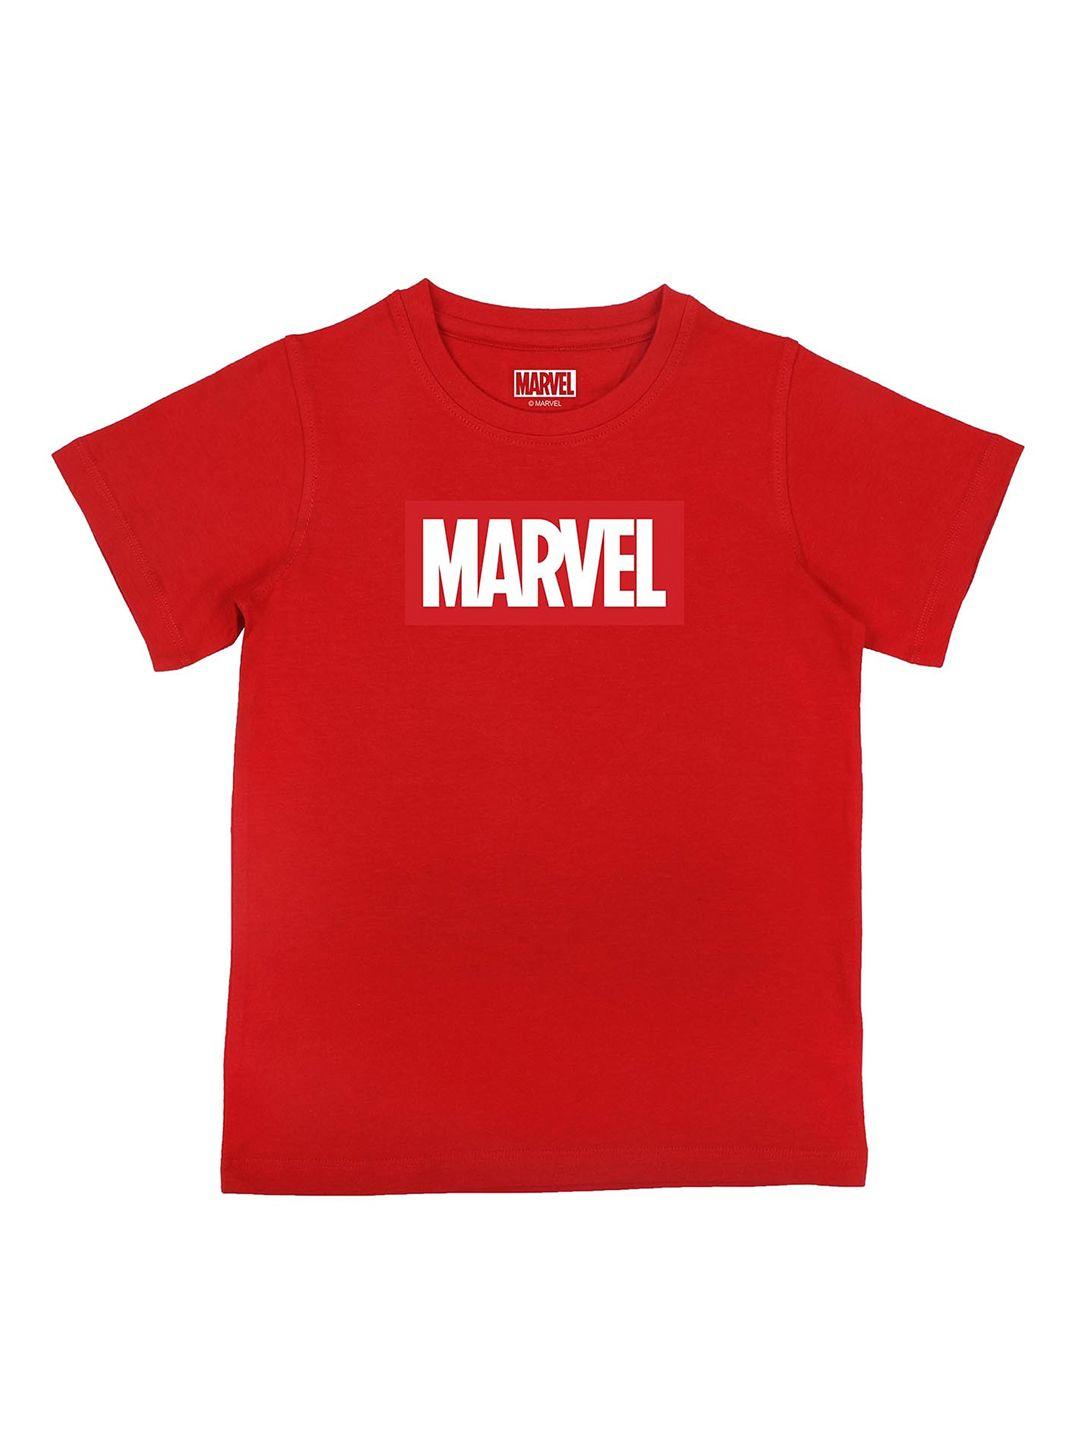 marvel-by-wear-your-mind-boys-red-typography-printed-avengers-cotton-t-shirt